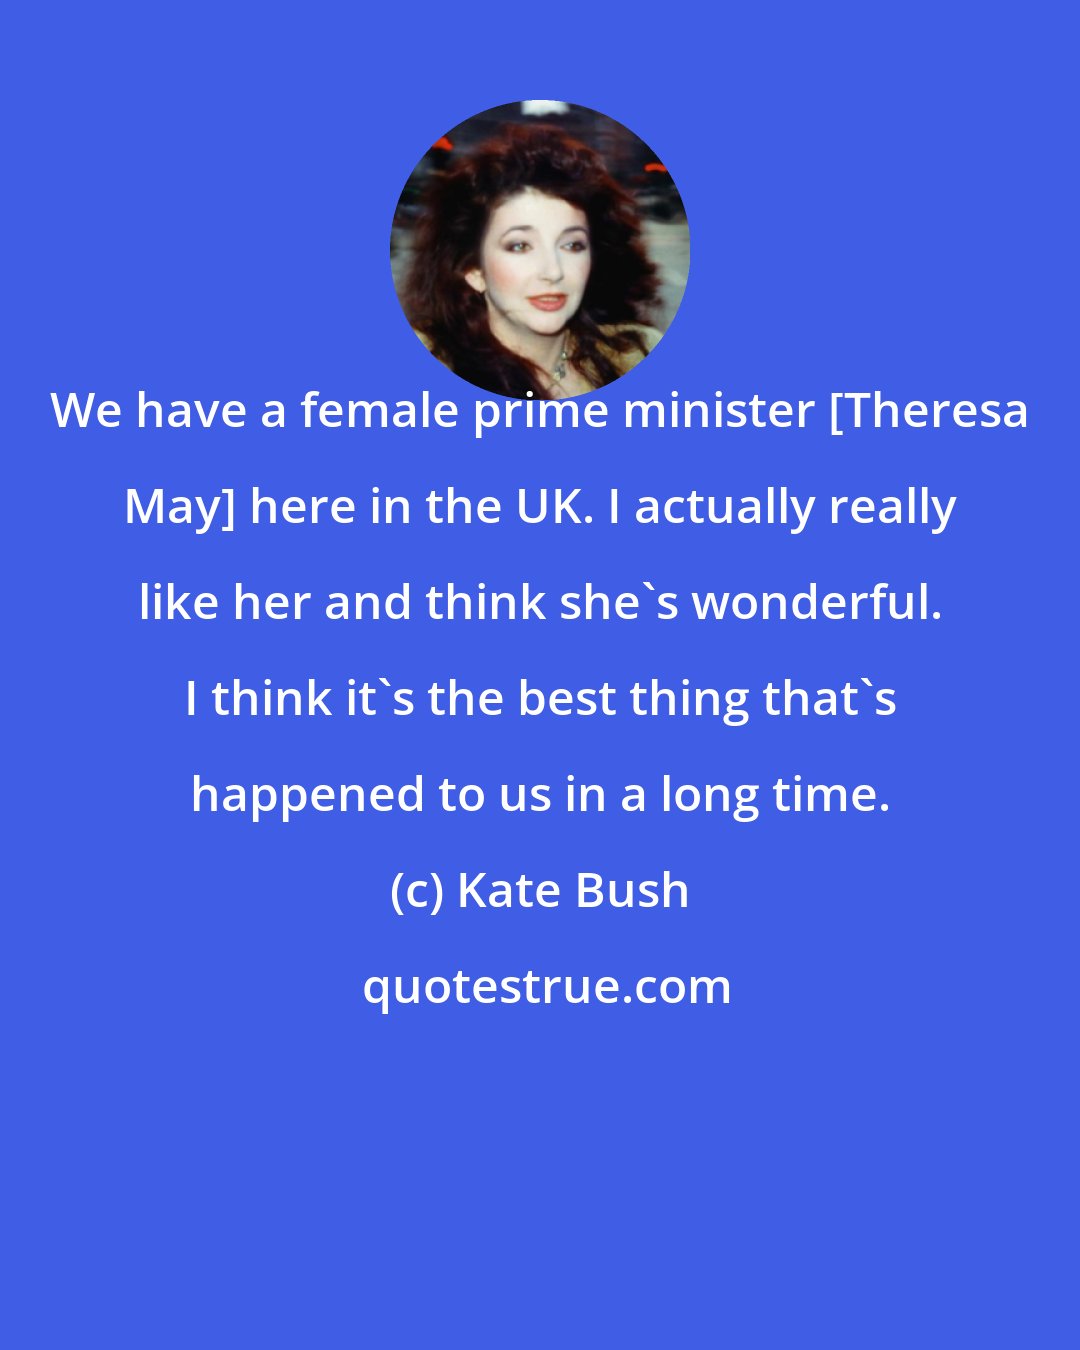 Kate Bush: We have a female prime minister [Theresa May] here in the UK. I actually really like her and think she's wonderful. I think it's the best thing that's happened to us in a long time.